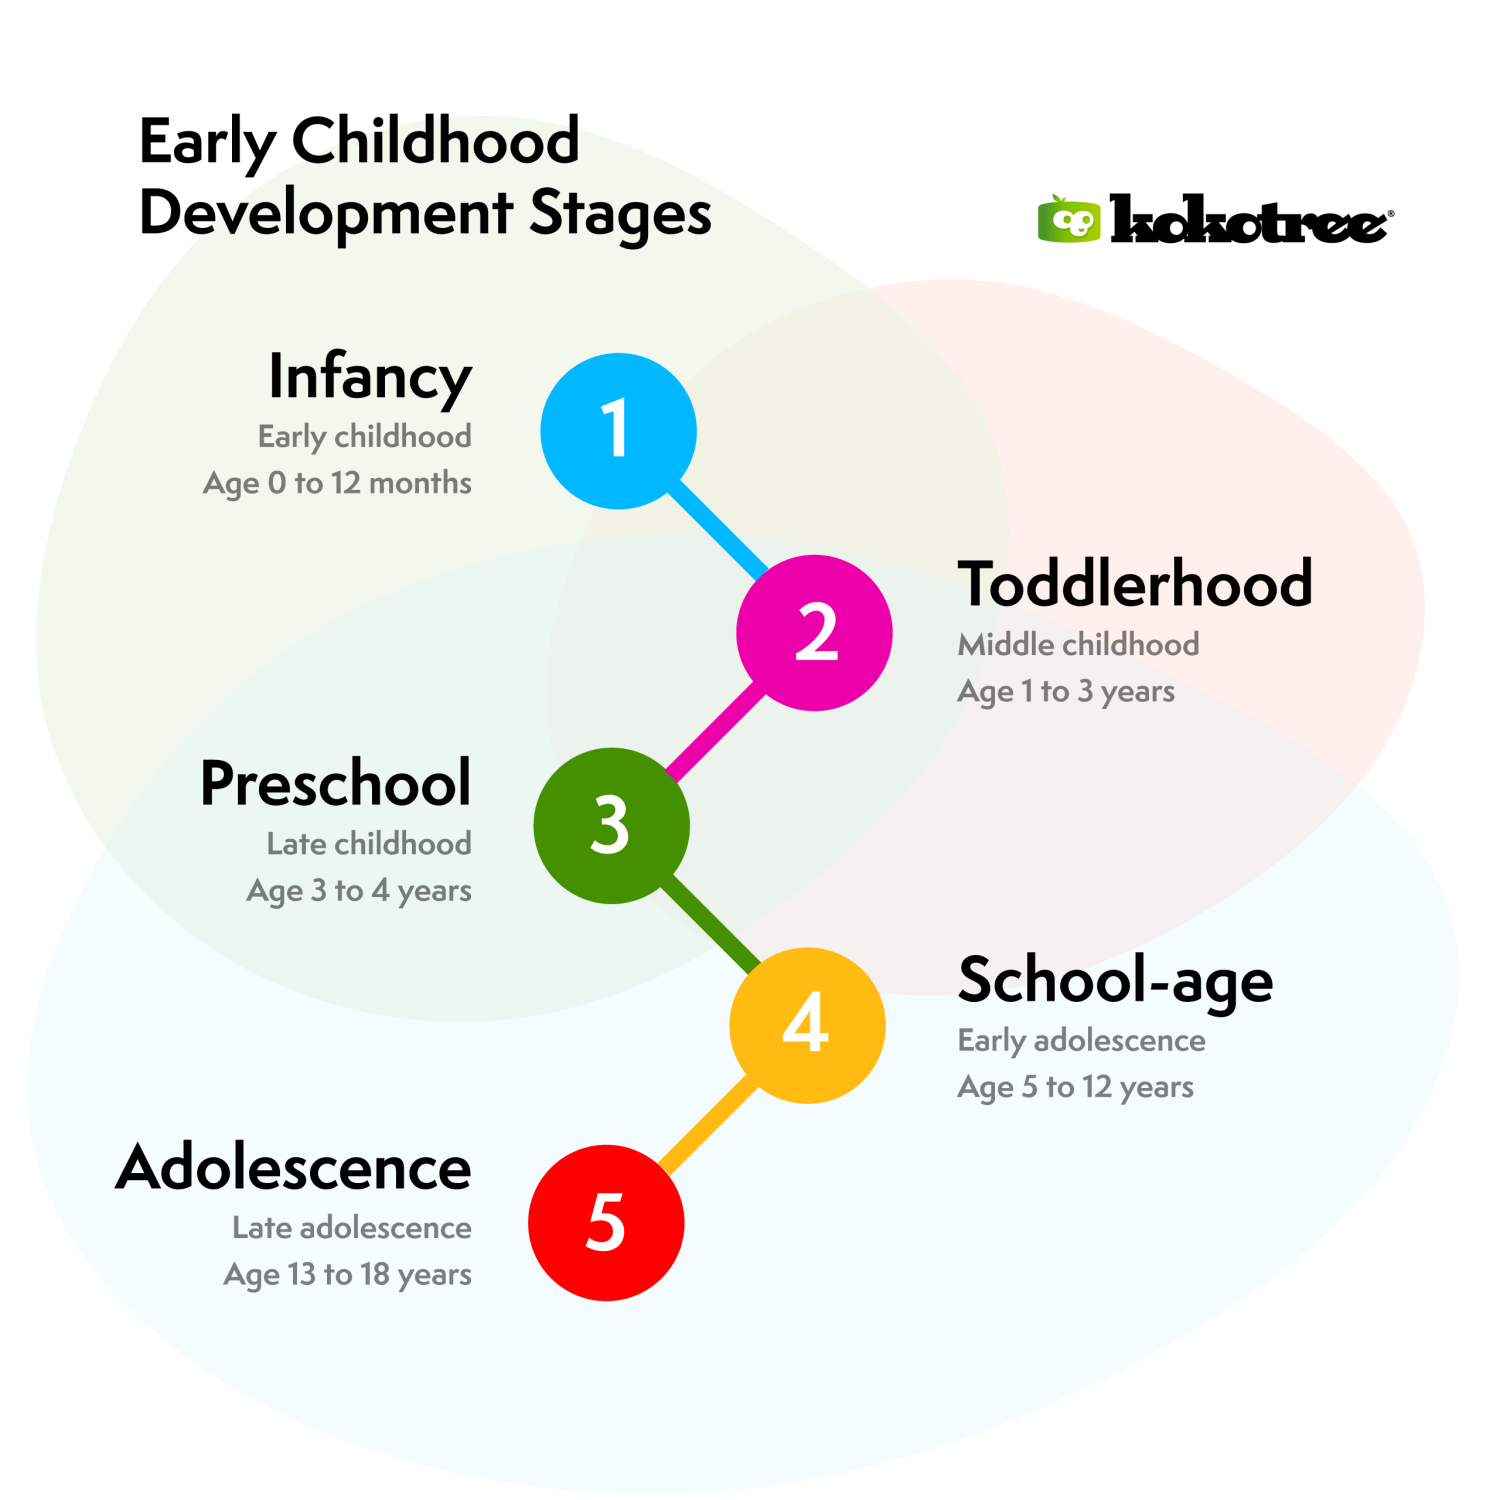 early childhood development stages